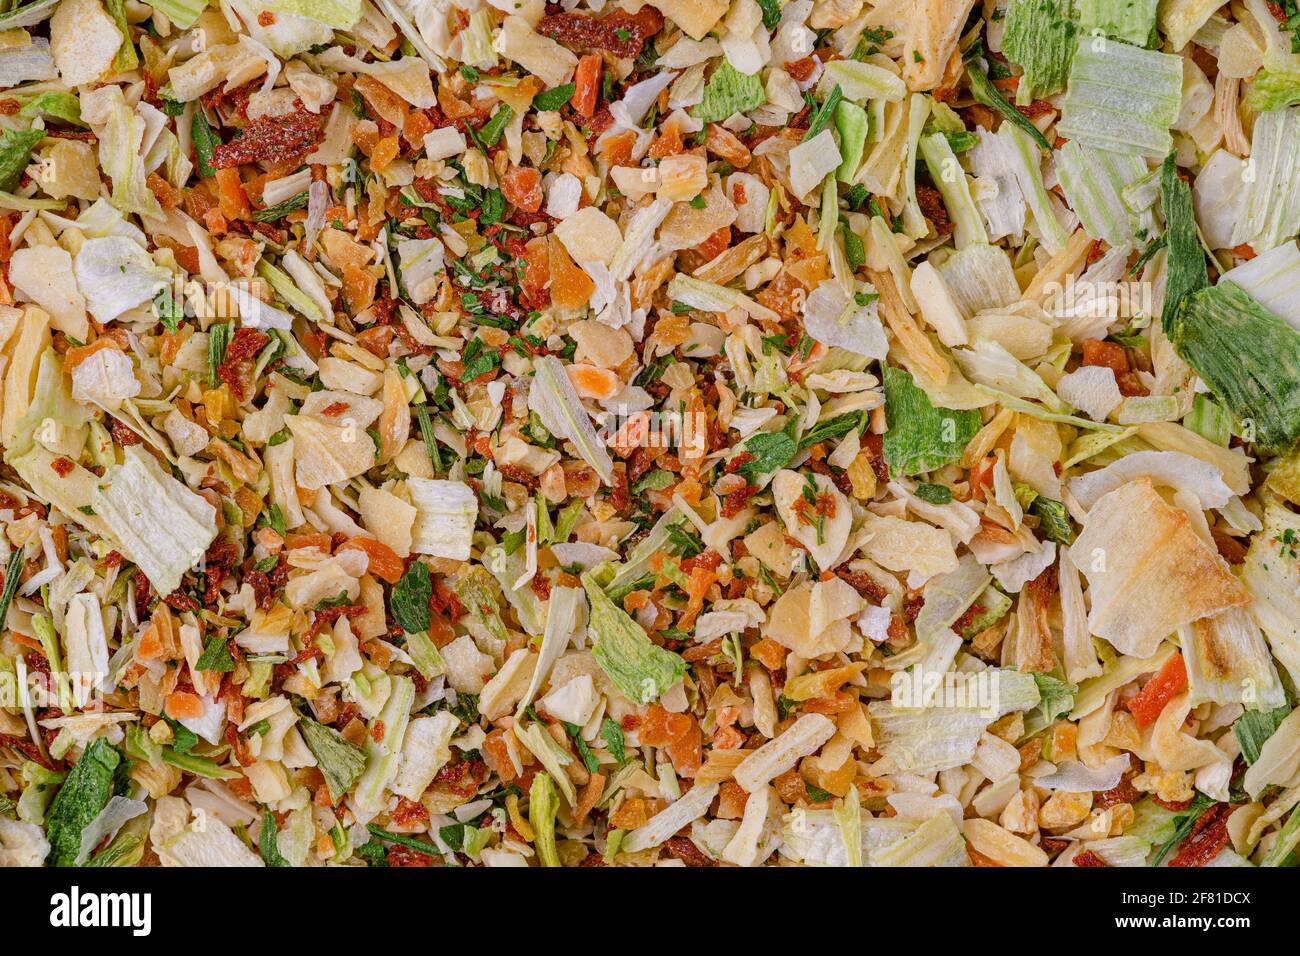 Dry vegetables background of carrot, celery and onion. Stock Photo